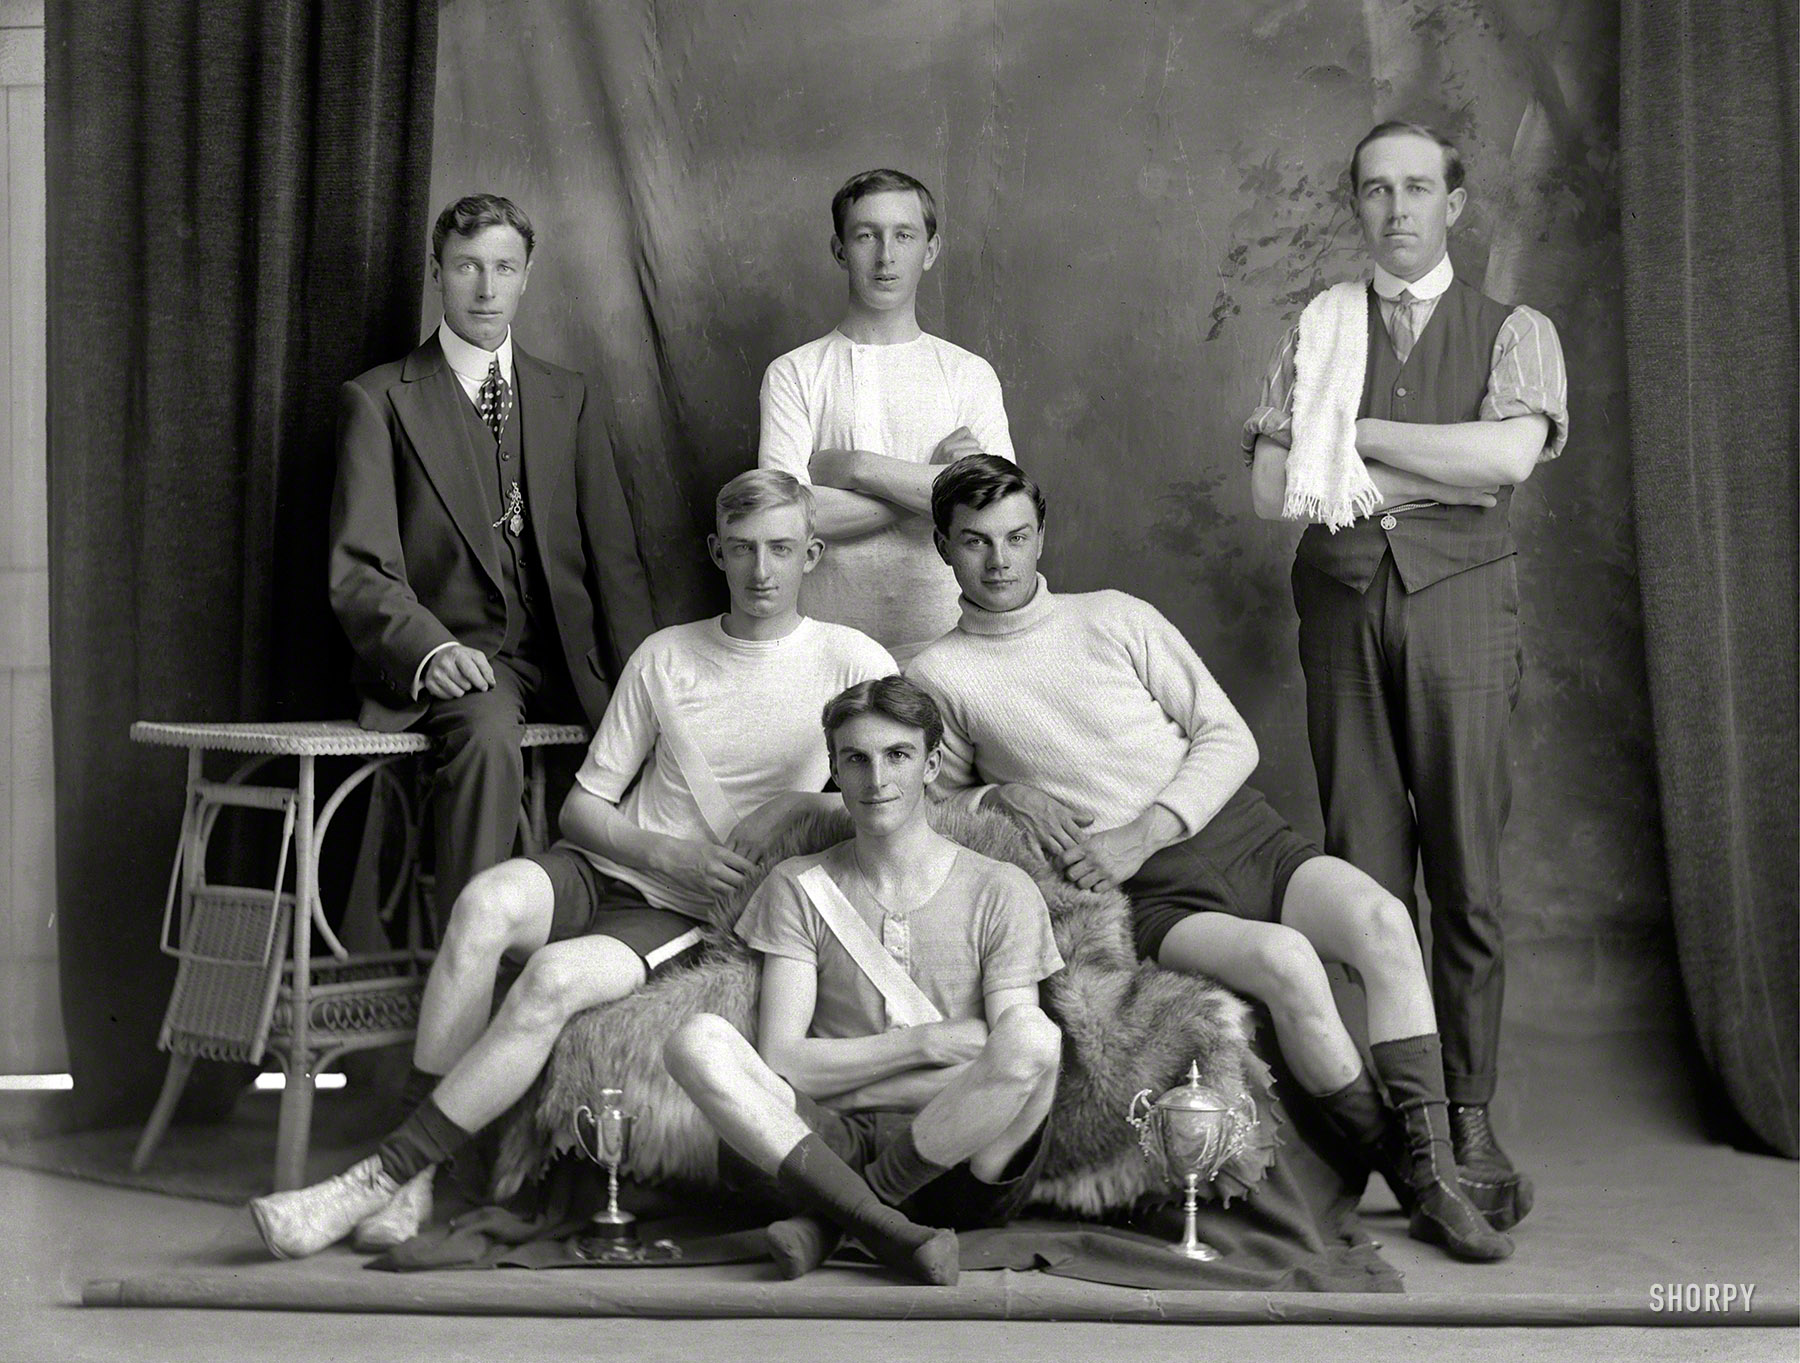 New Zealand circa 1910. "Studio portrait of bicycle road racing team with four young men in riding attire with two small cups, manager with polka dot tie and coach alongside, Christchurch." Glass negative by Adam Maclay. View full size.